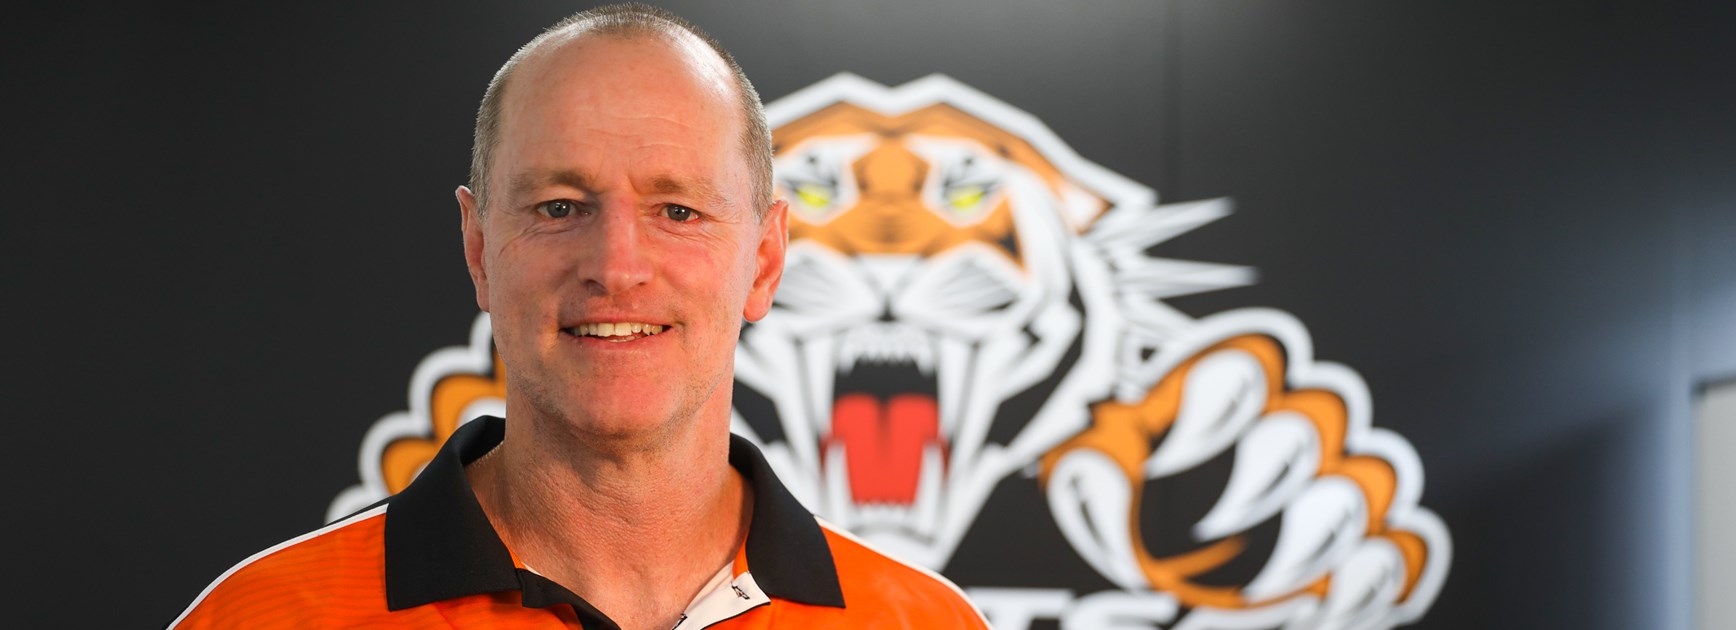 Wests Tigers update on Coach Michael Maguire